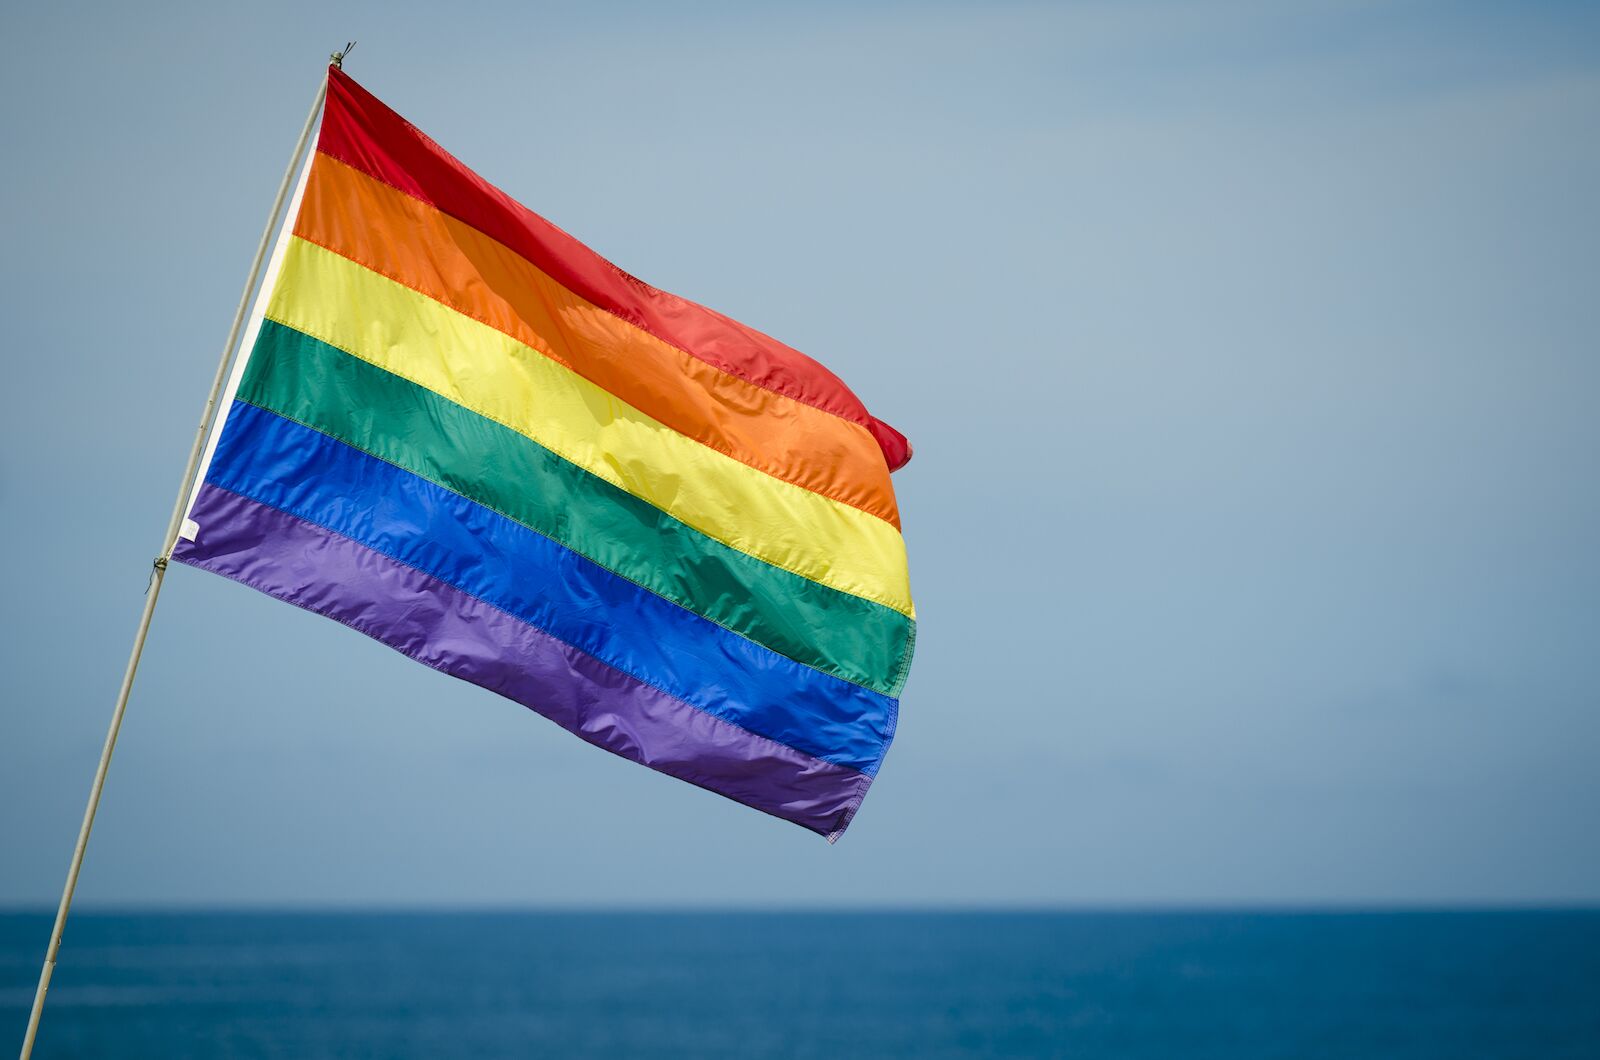 Gay pride rainbow flag flying outdoors in bright summer sun above the ocean horizon in Fire Island, New York